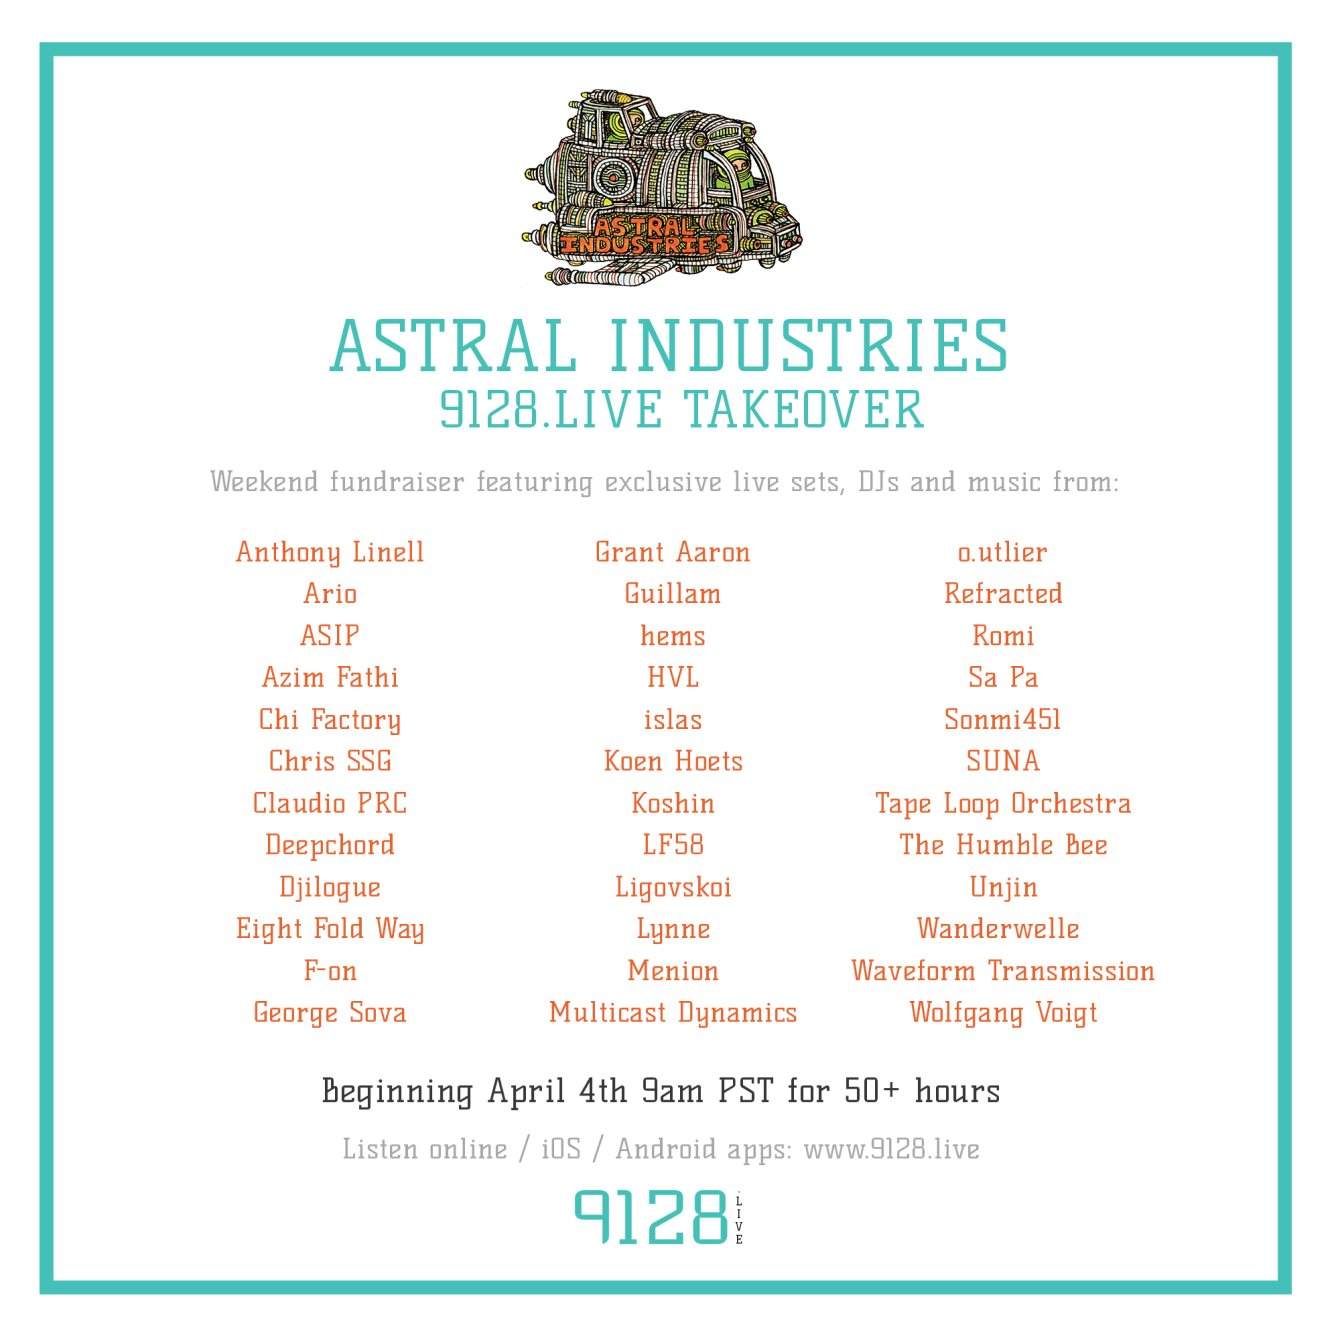 Astral Industries 9128.Live Weekend Takeover - Página frontal